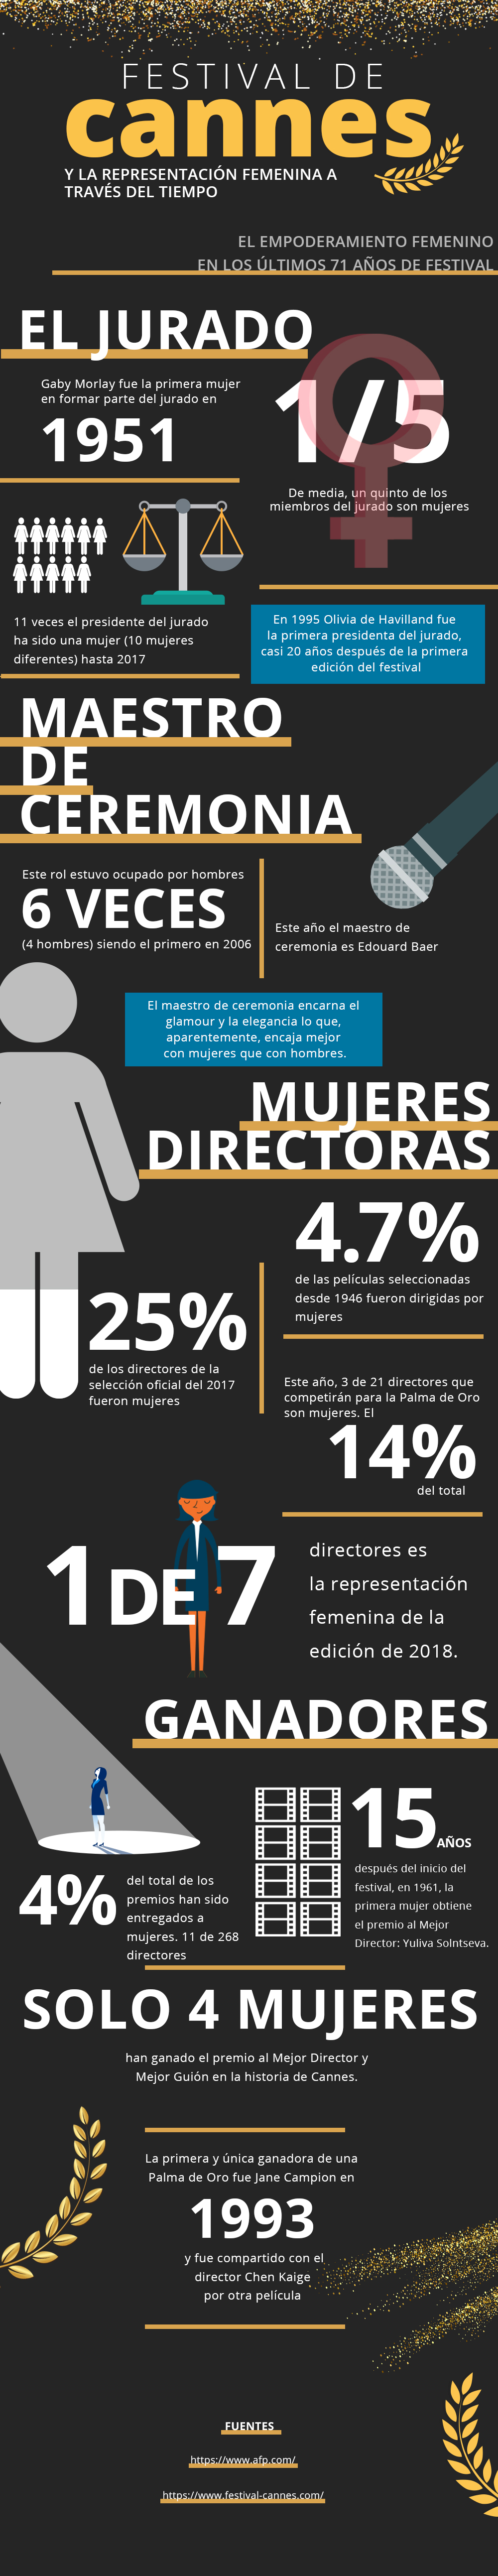 Infografia-cannes-mujeres